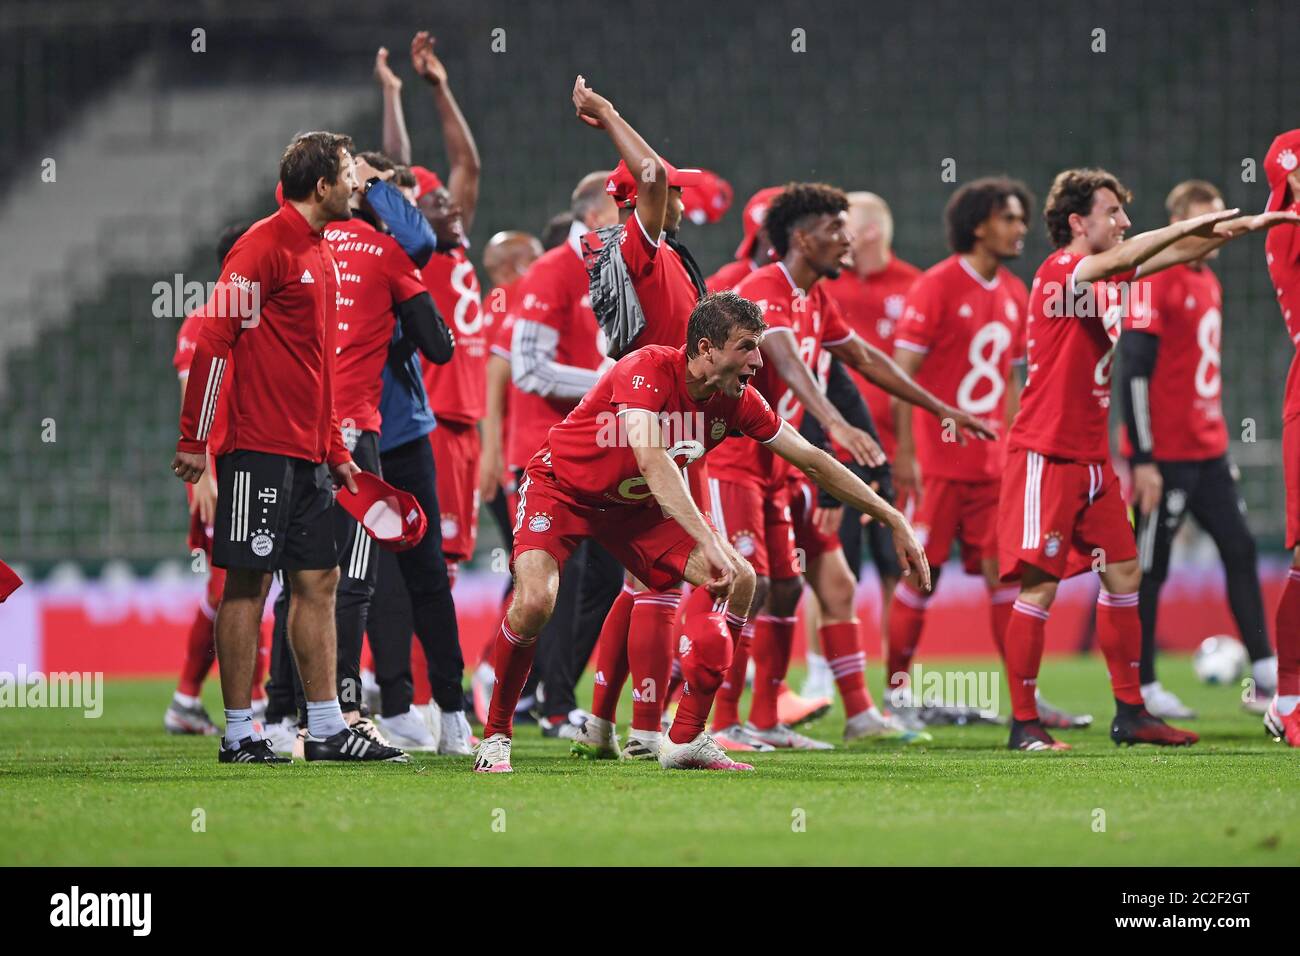 Deutscher Meister 2020 High Resolution Stock Photography and Images - Alamy